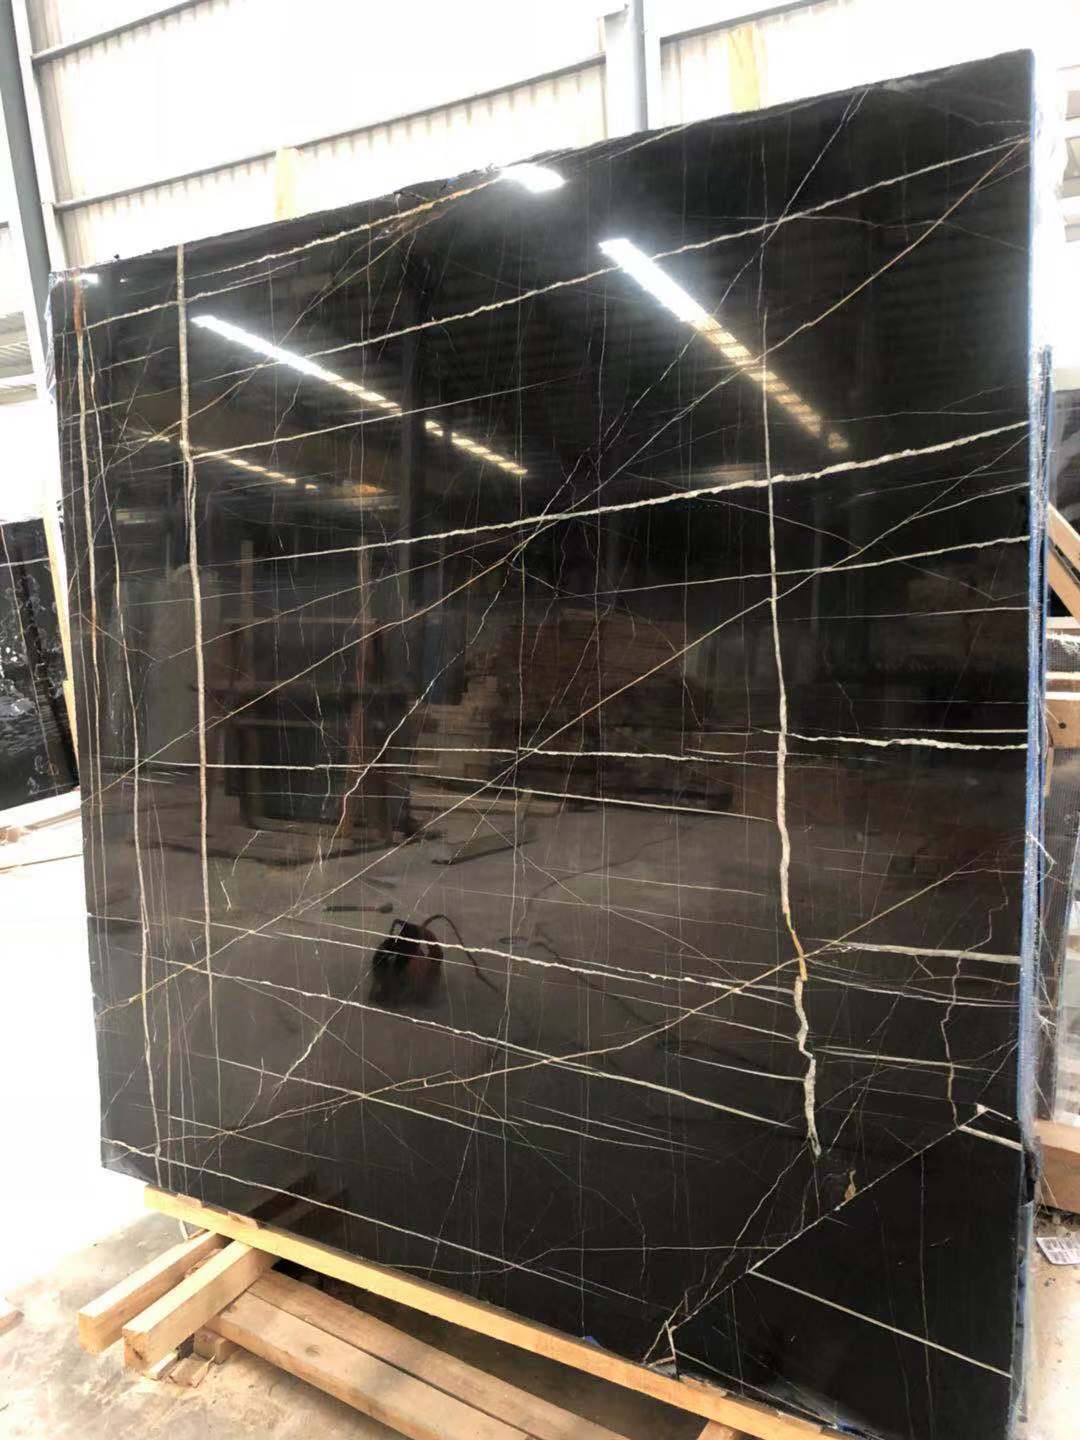 Sahara Noir Veins Polished Slabs Marble Cheap China Black with White Gold 100% Natural Marble Floor or Wall FIRST Stone Big Slab